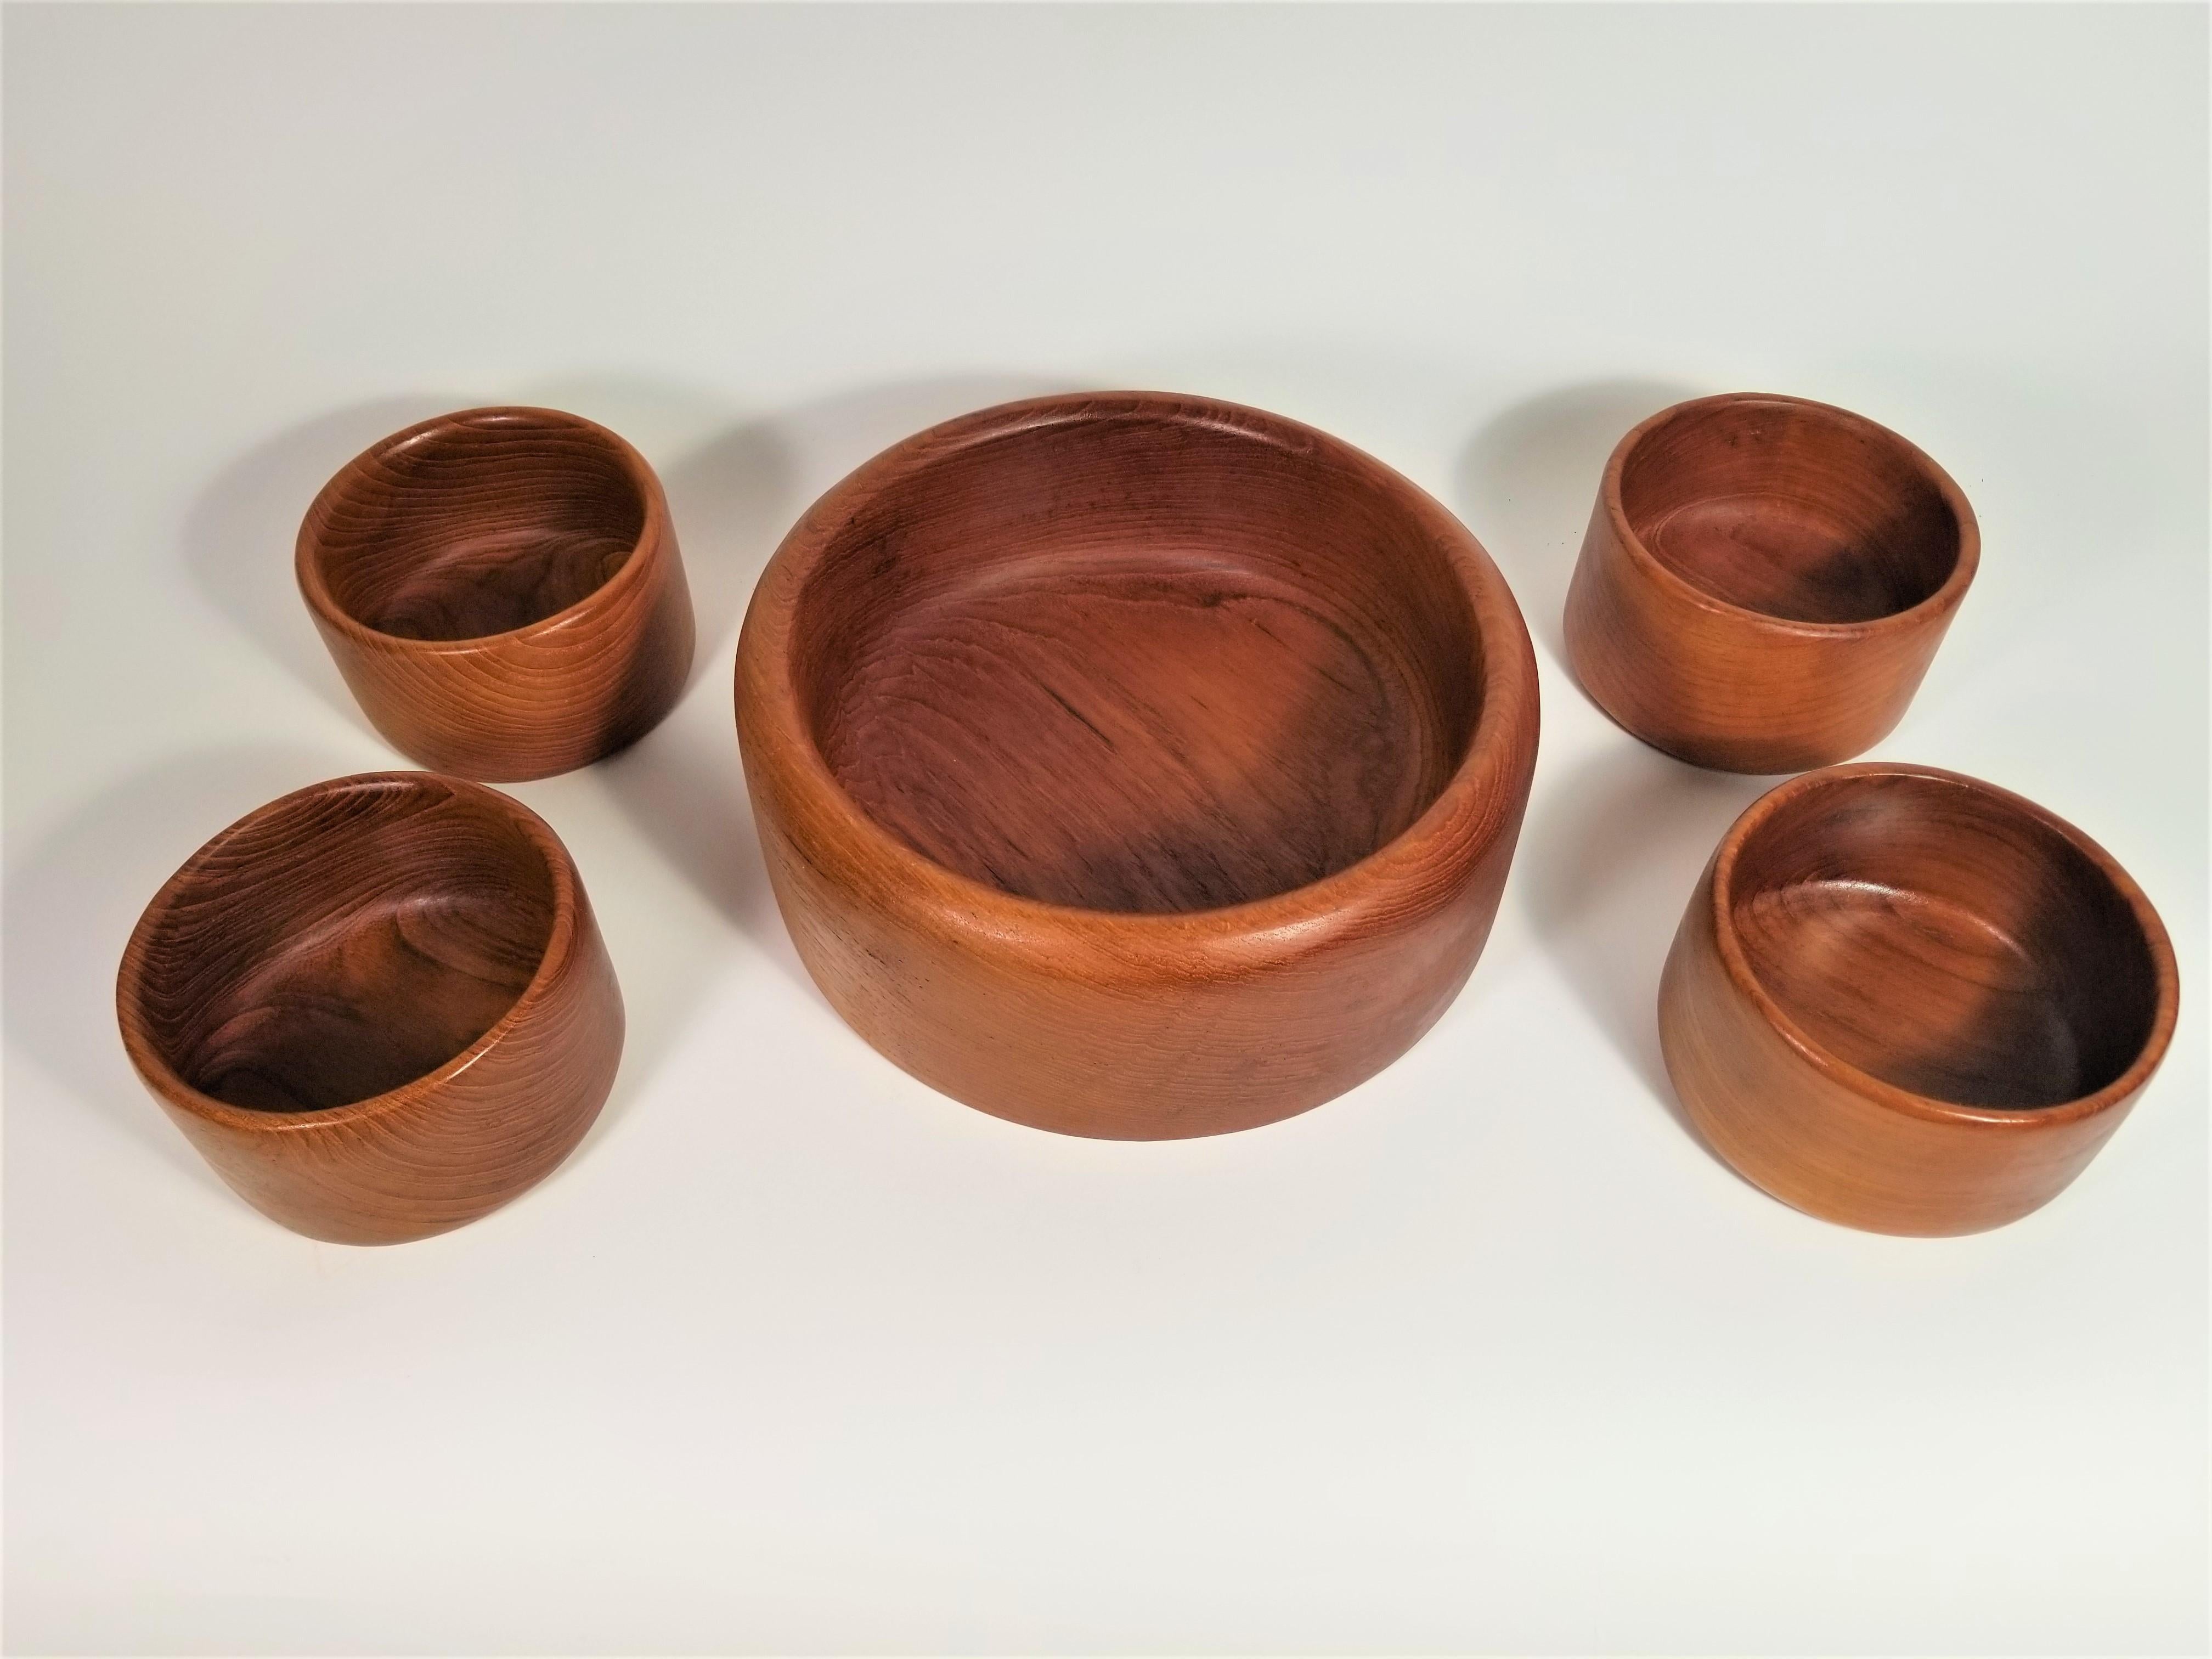 1960s Midcentury Hand Turned Teak Bowl Set 5 Piece In Excellent Condition For Sale In New York, NY